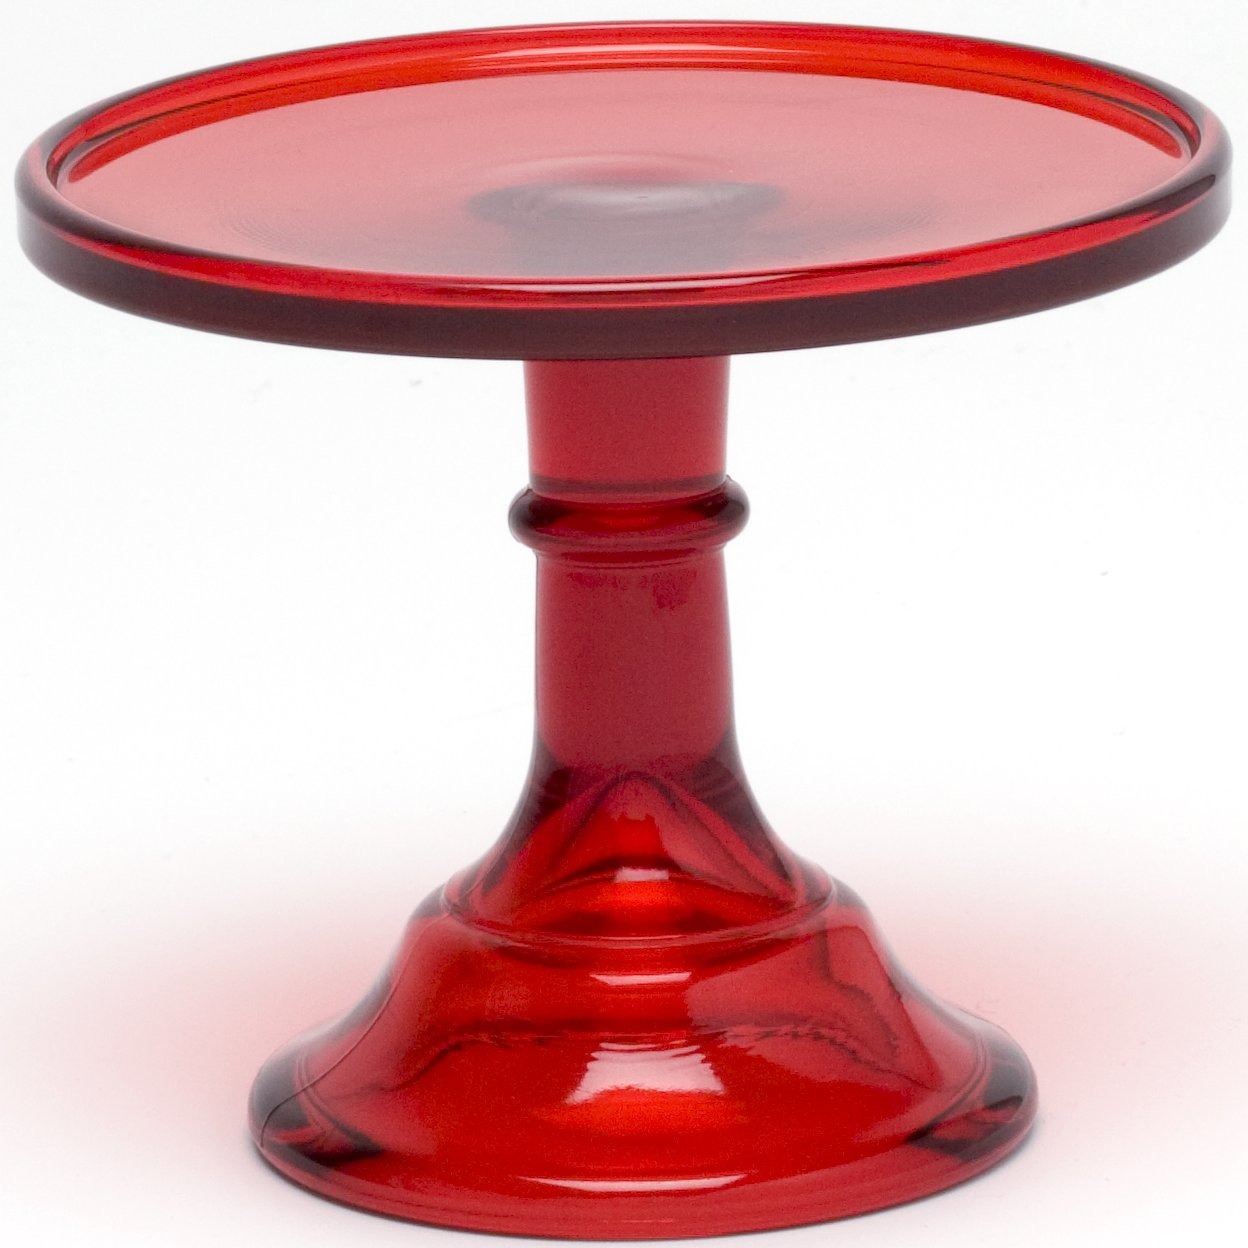 Mosser Glass 2406CRed Plain and Simple 240 6 Cake Stand Cake Plate Red